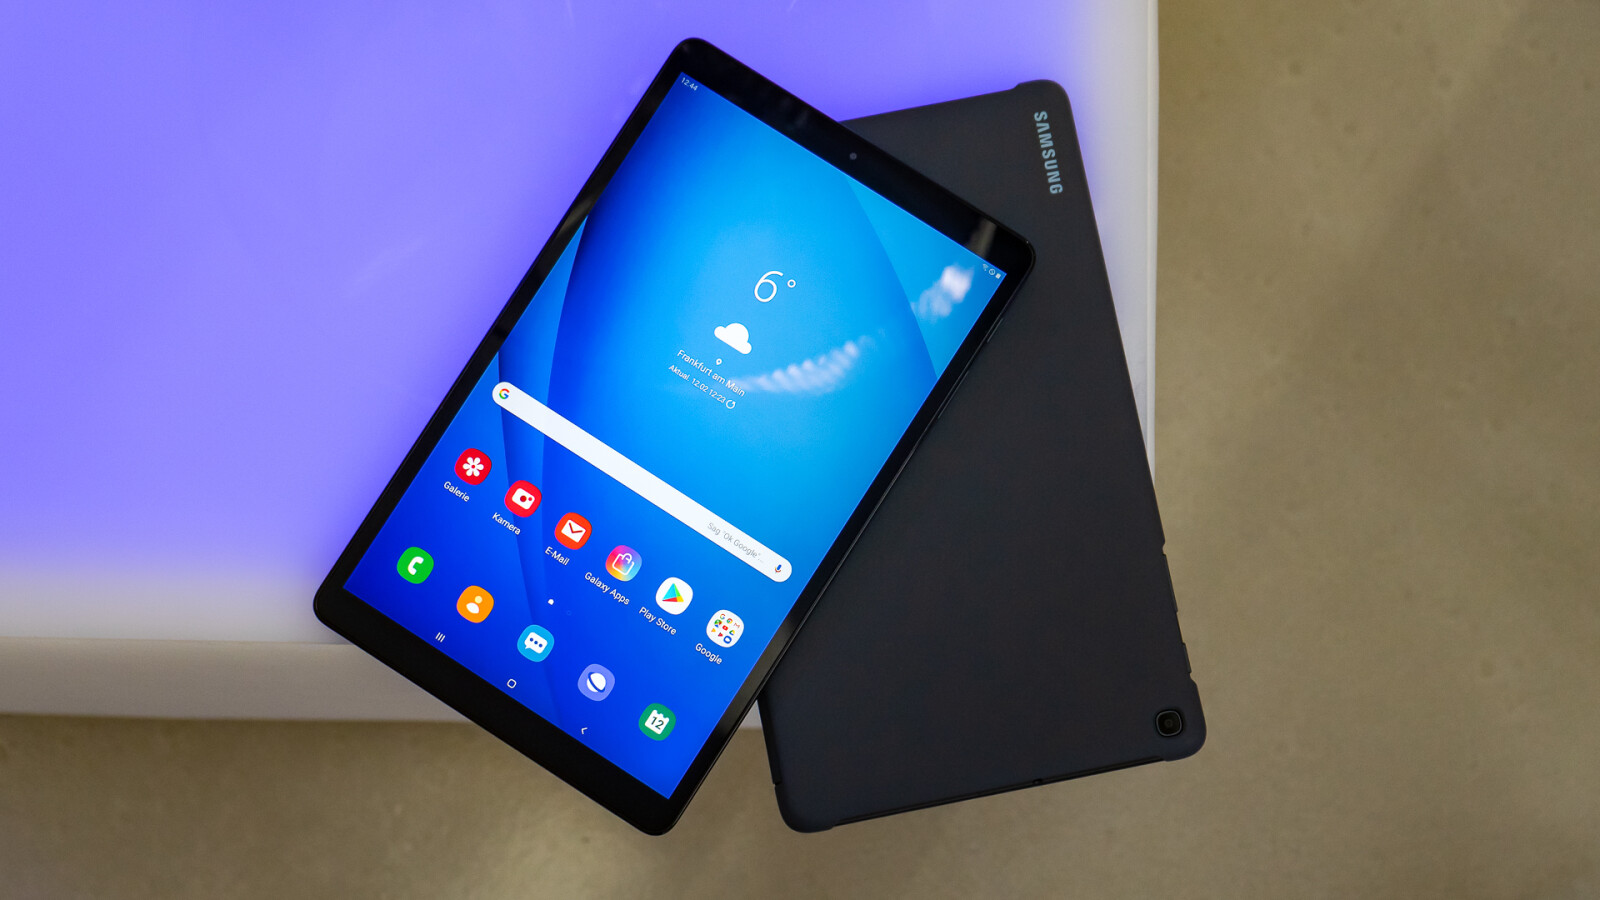 Desire 626s ps4 tab s5e samsung pc download galaxy ps4 = how a3000